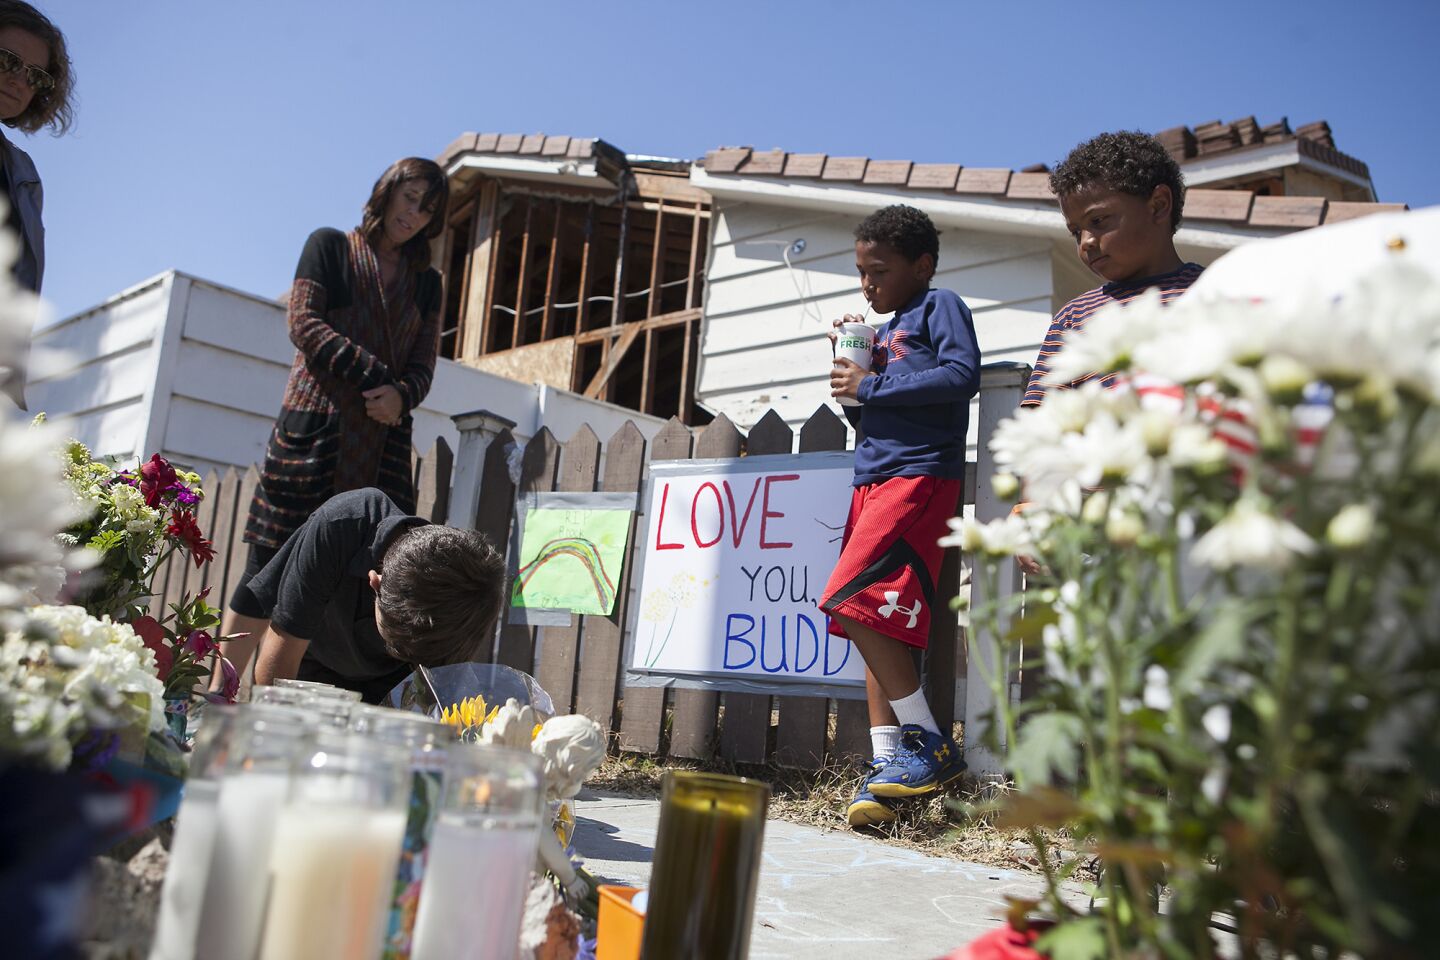 Visitors view a roadside memorial for an 8-year-old boy who was hit and killed by a truck Wednesday at 15th Street and Michael Place in Newport Beach.